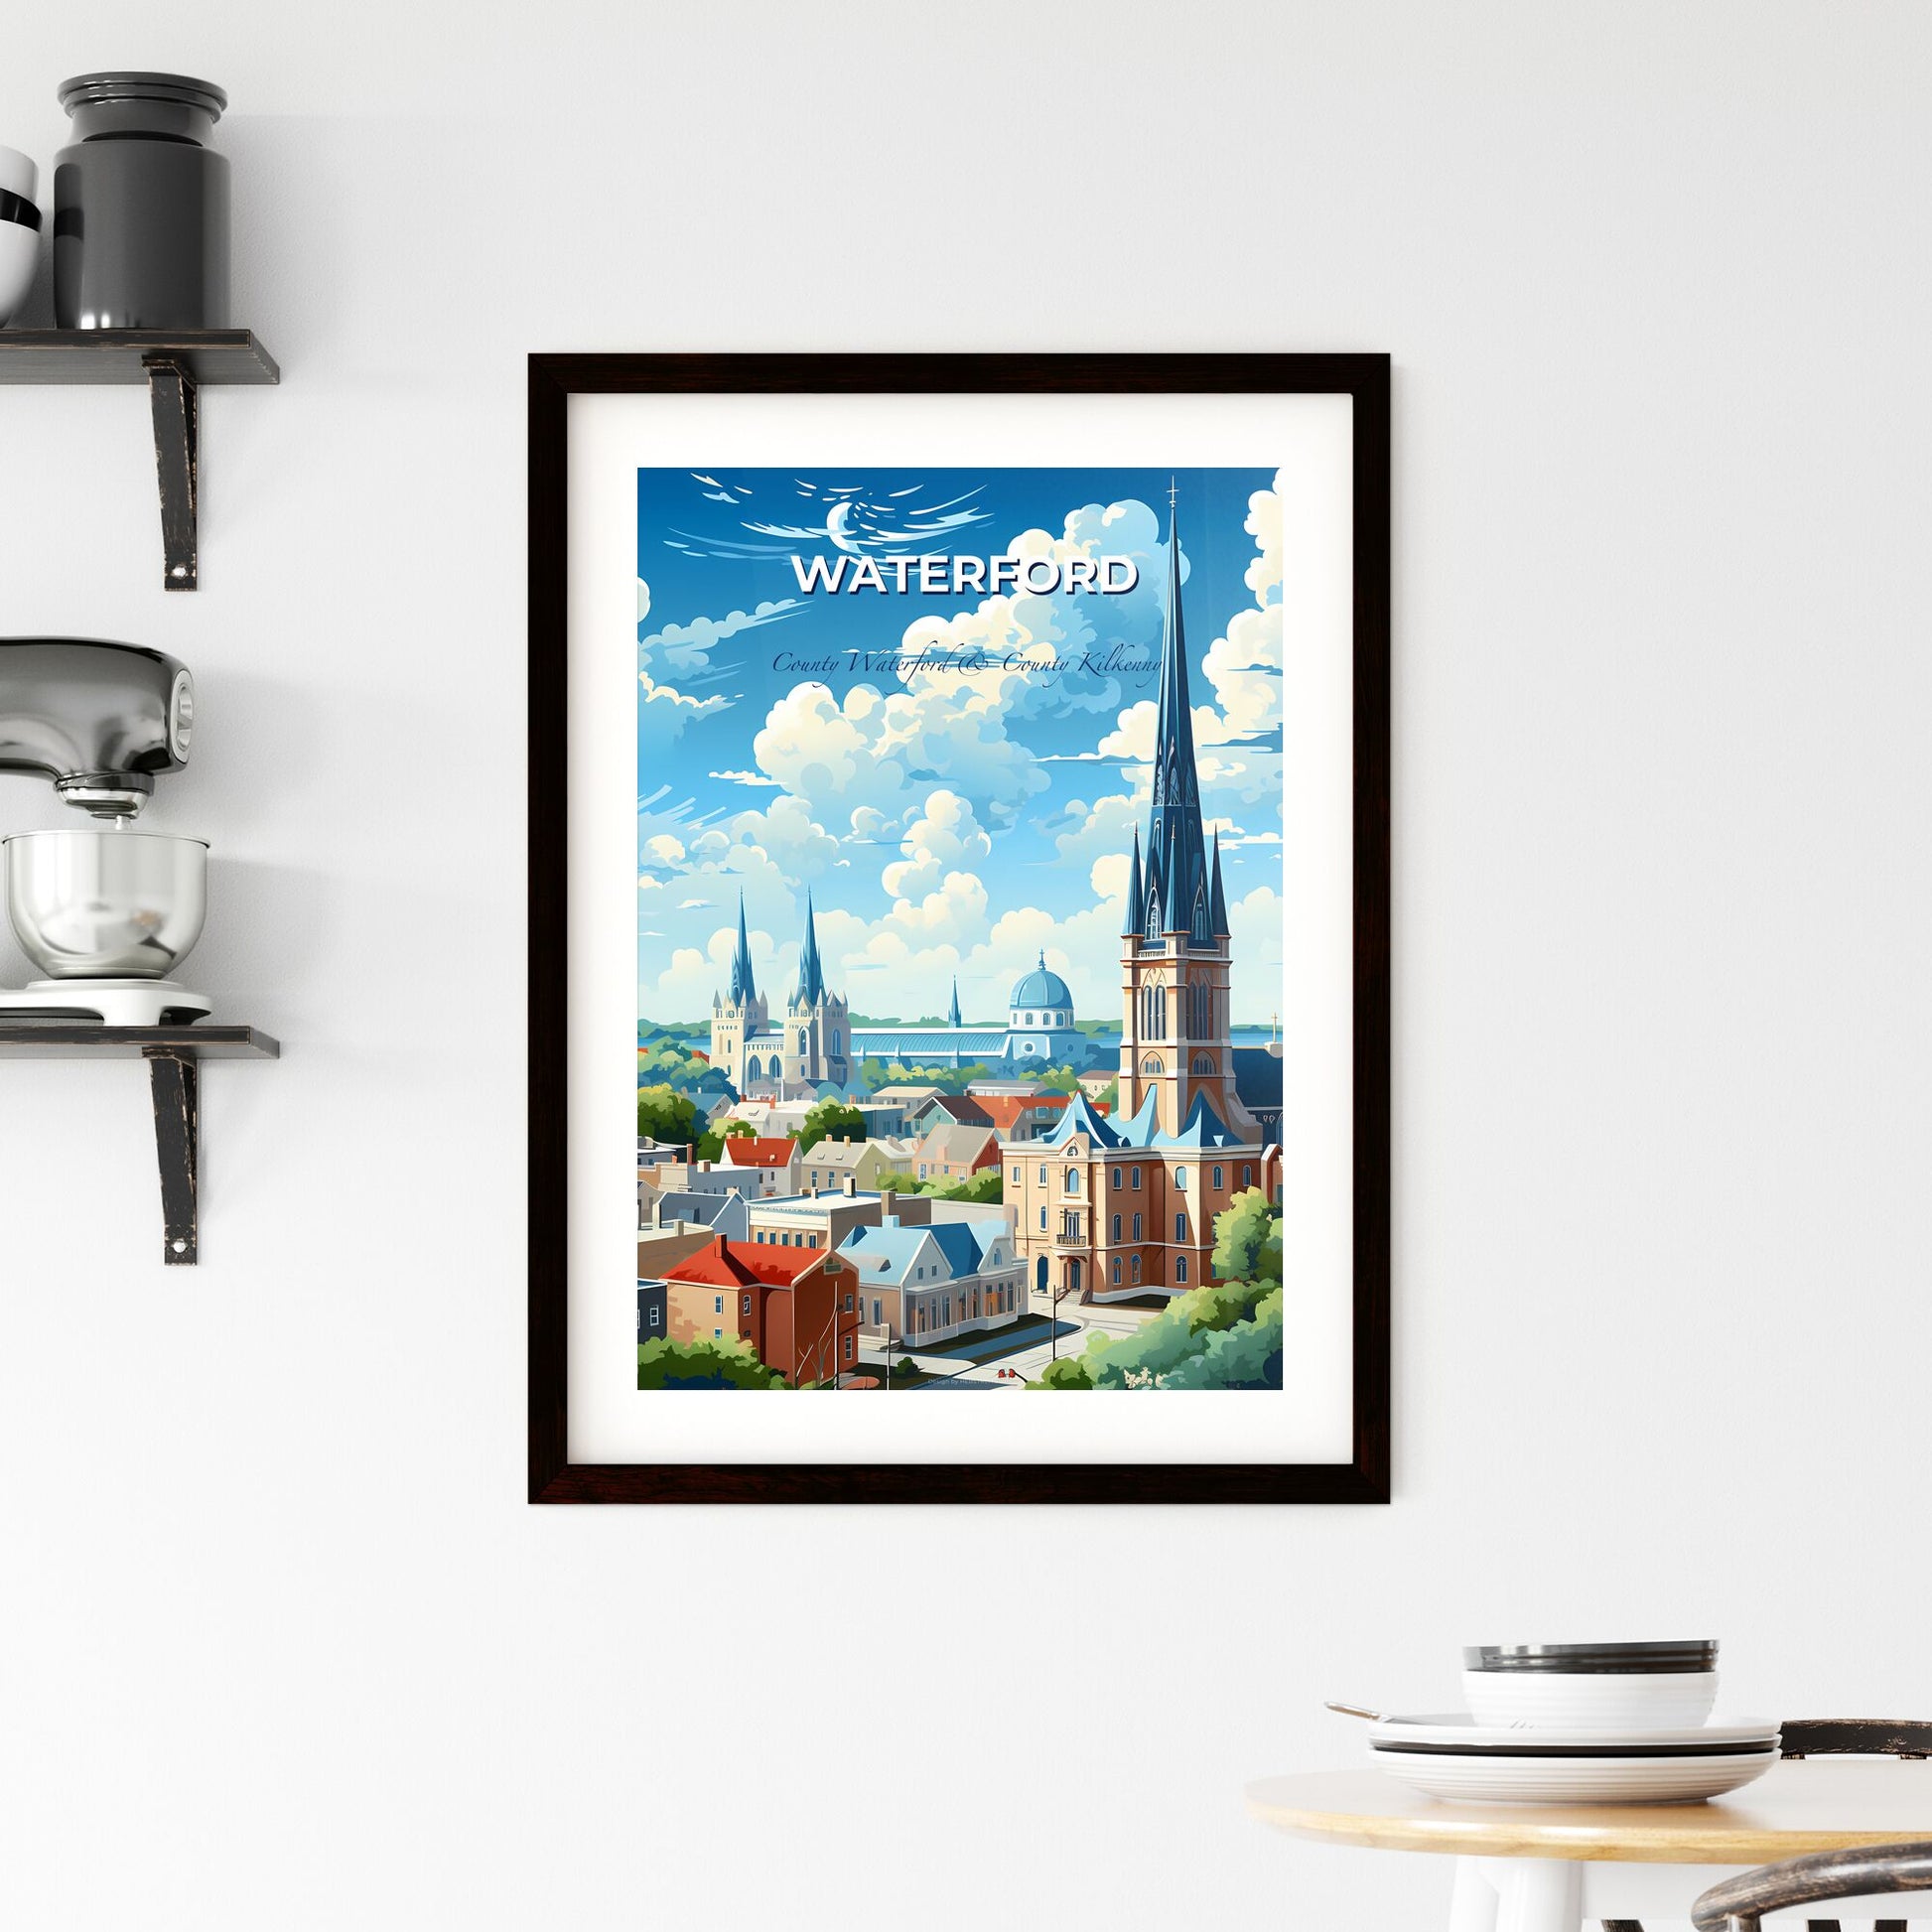 Waterford, County Waterford & County Kilkenny, A Poster of a city with a tall tower and buildings Default Title